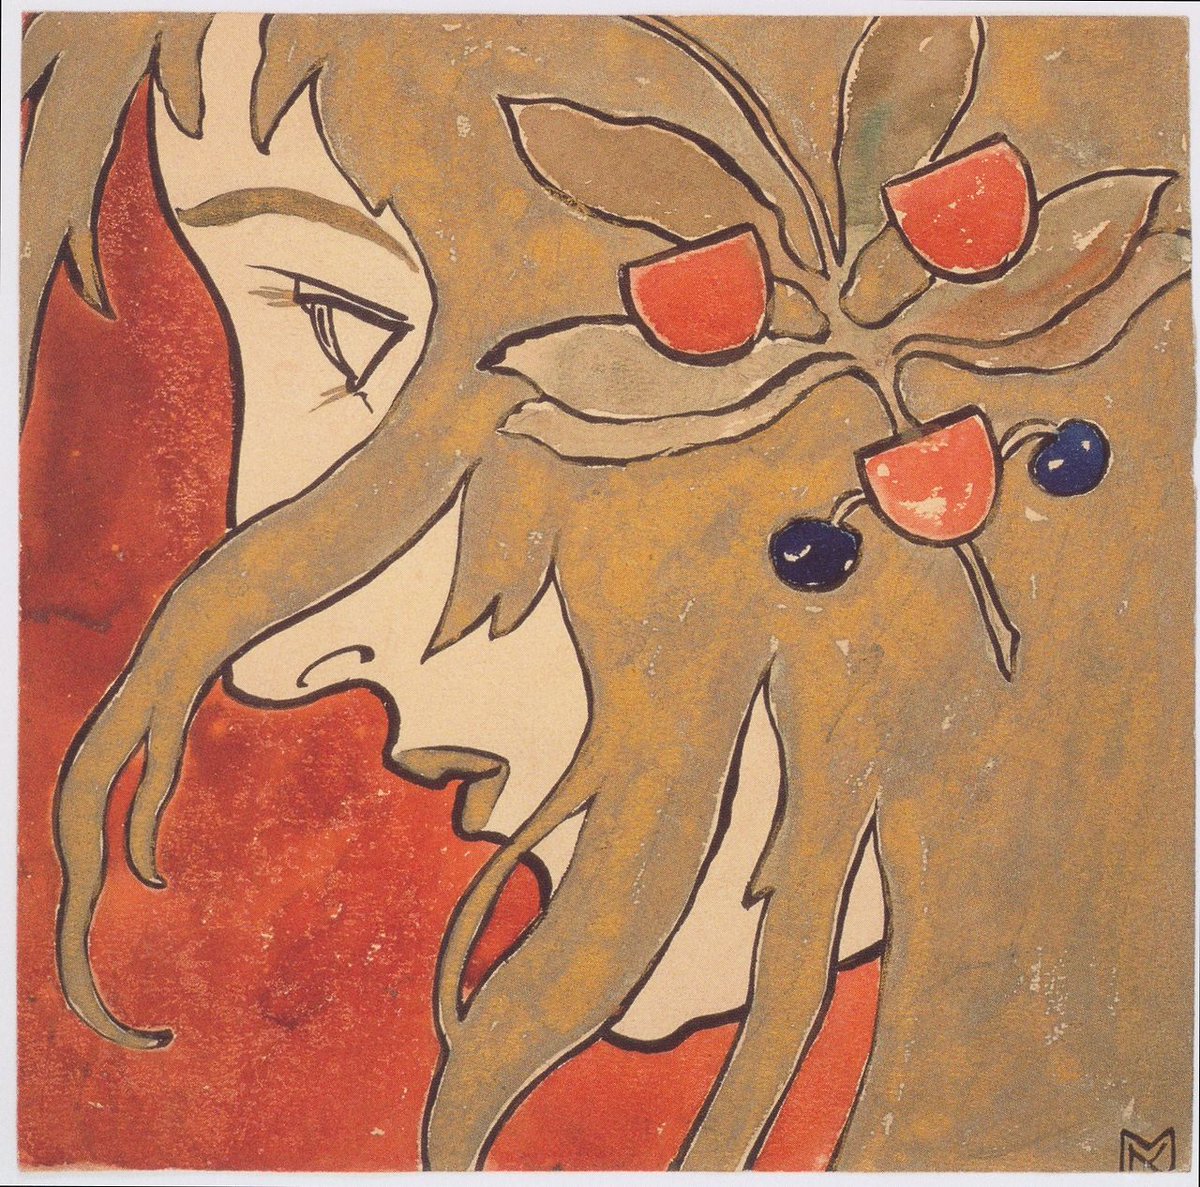 'Profile of a girl. Preparatory work for a decorative stain in red and green'. Koloman Moser. 1897.